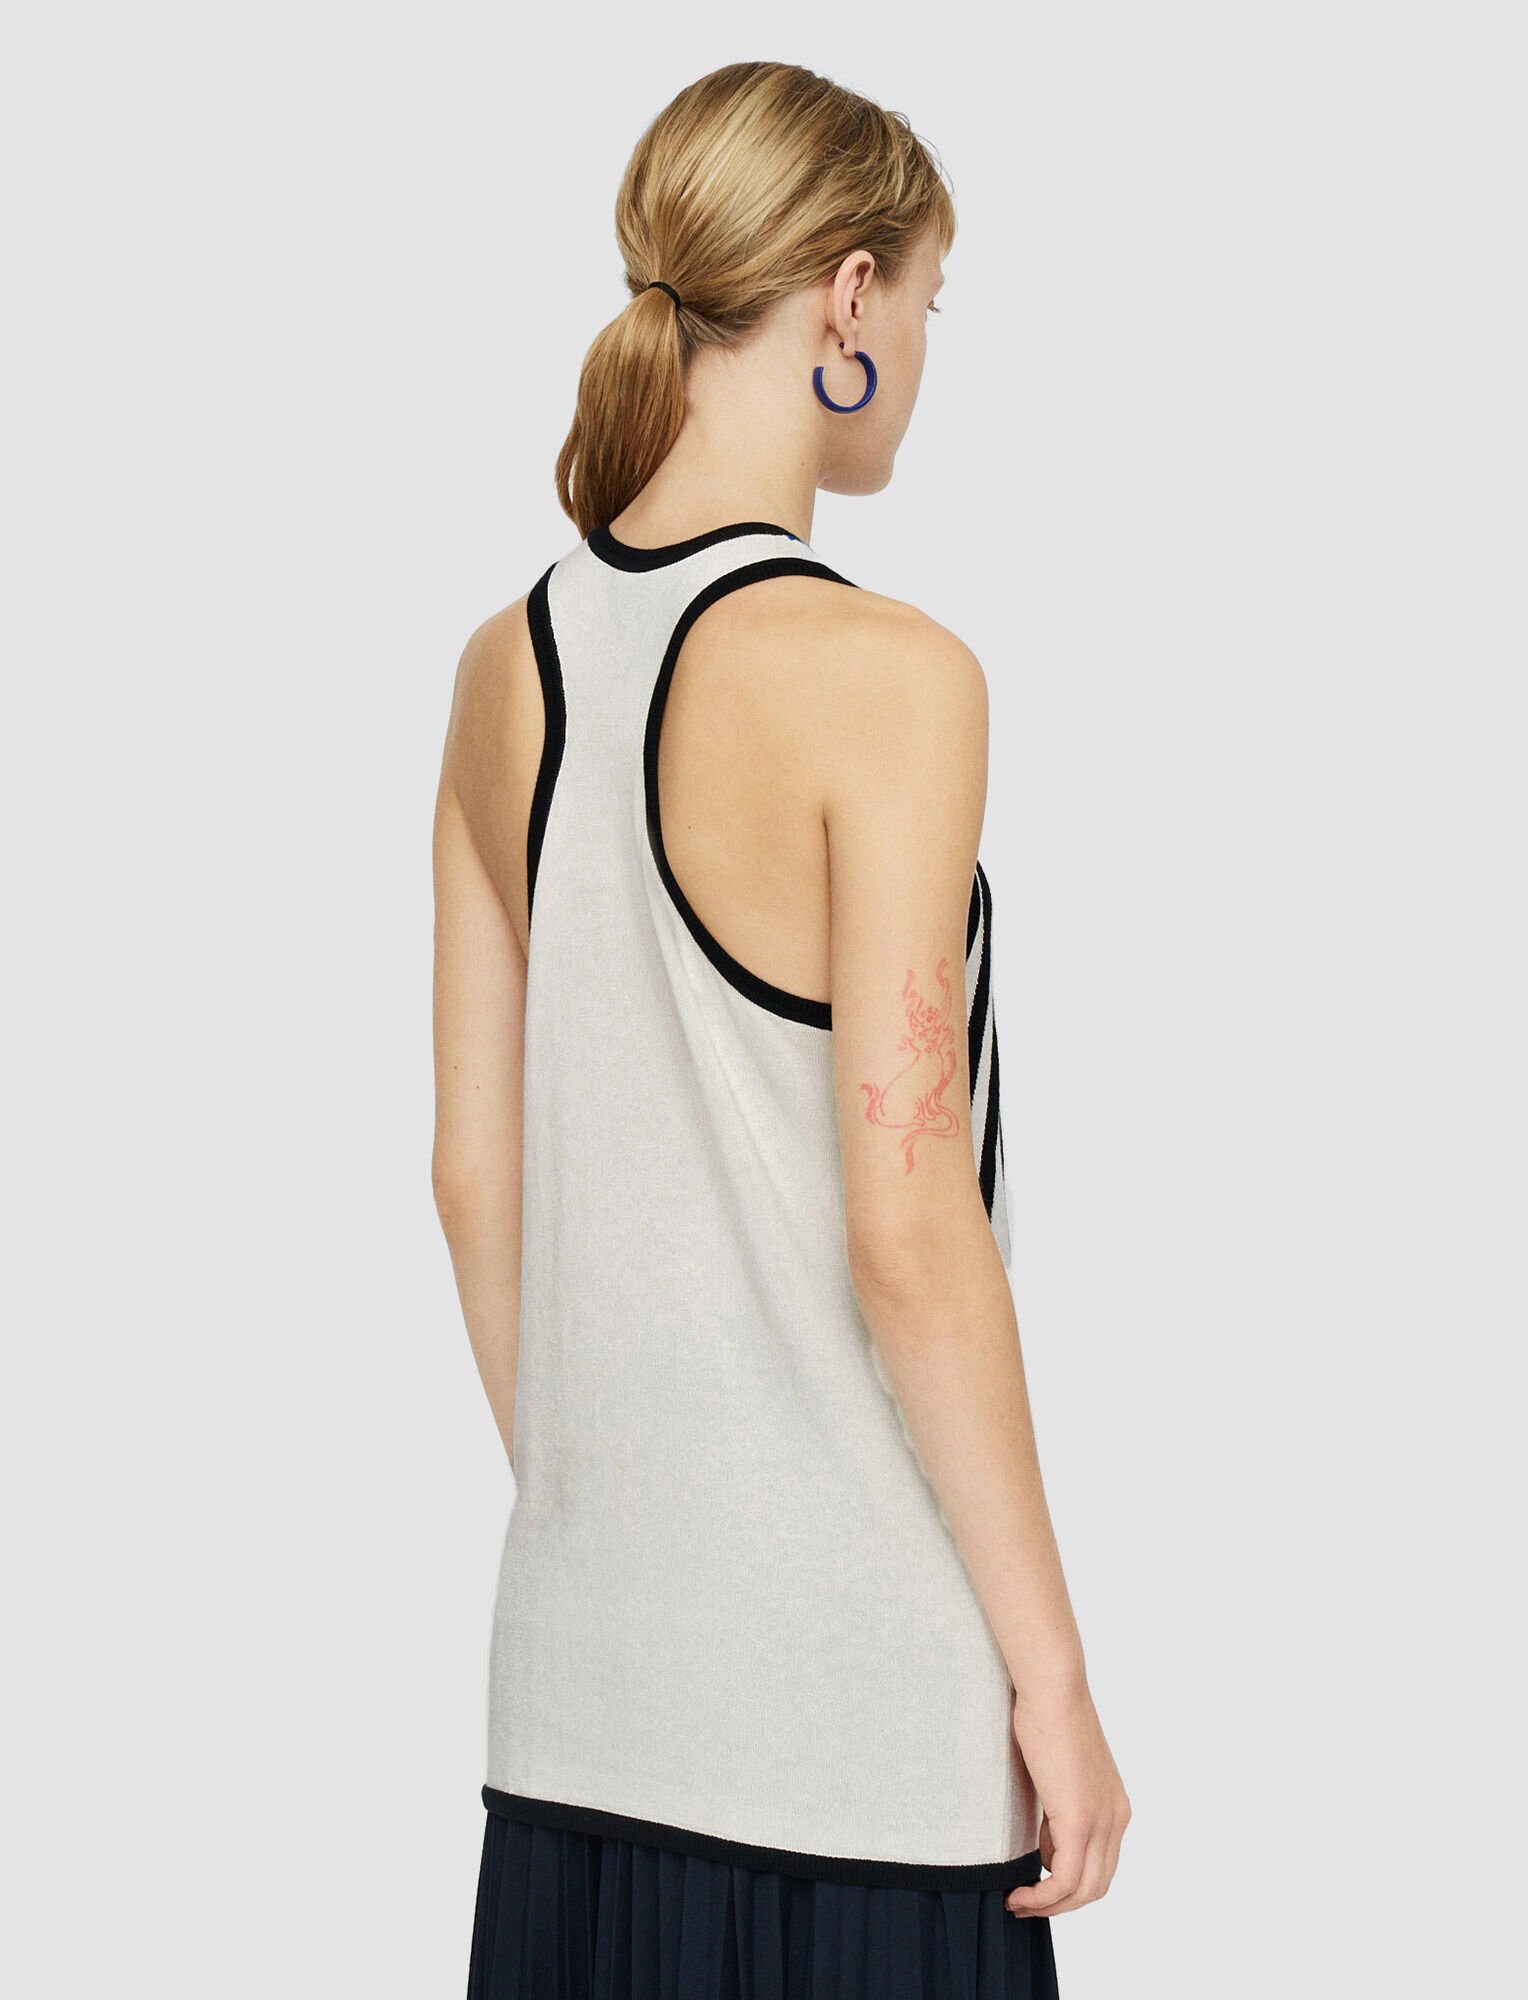 Joseph, Cretto Jacquard Knitted Tank Top, in Ivory Combo